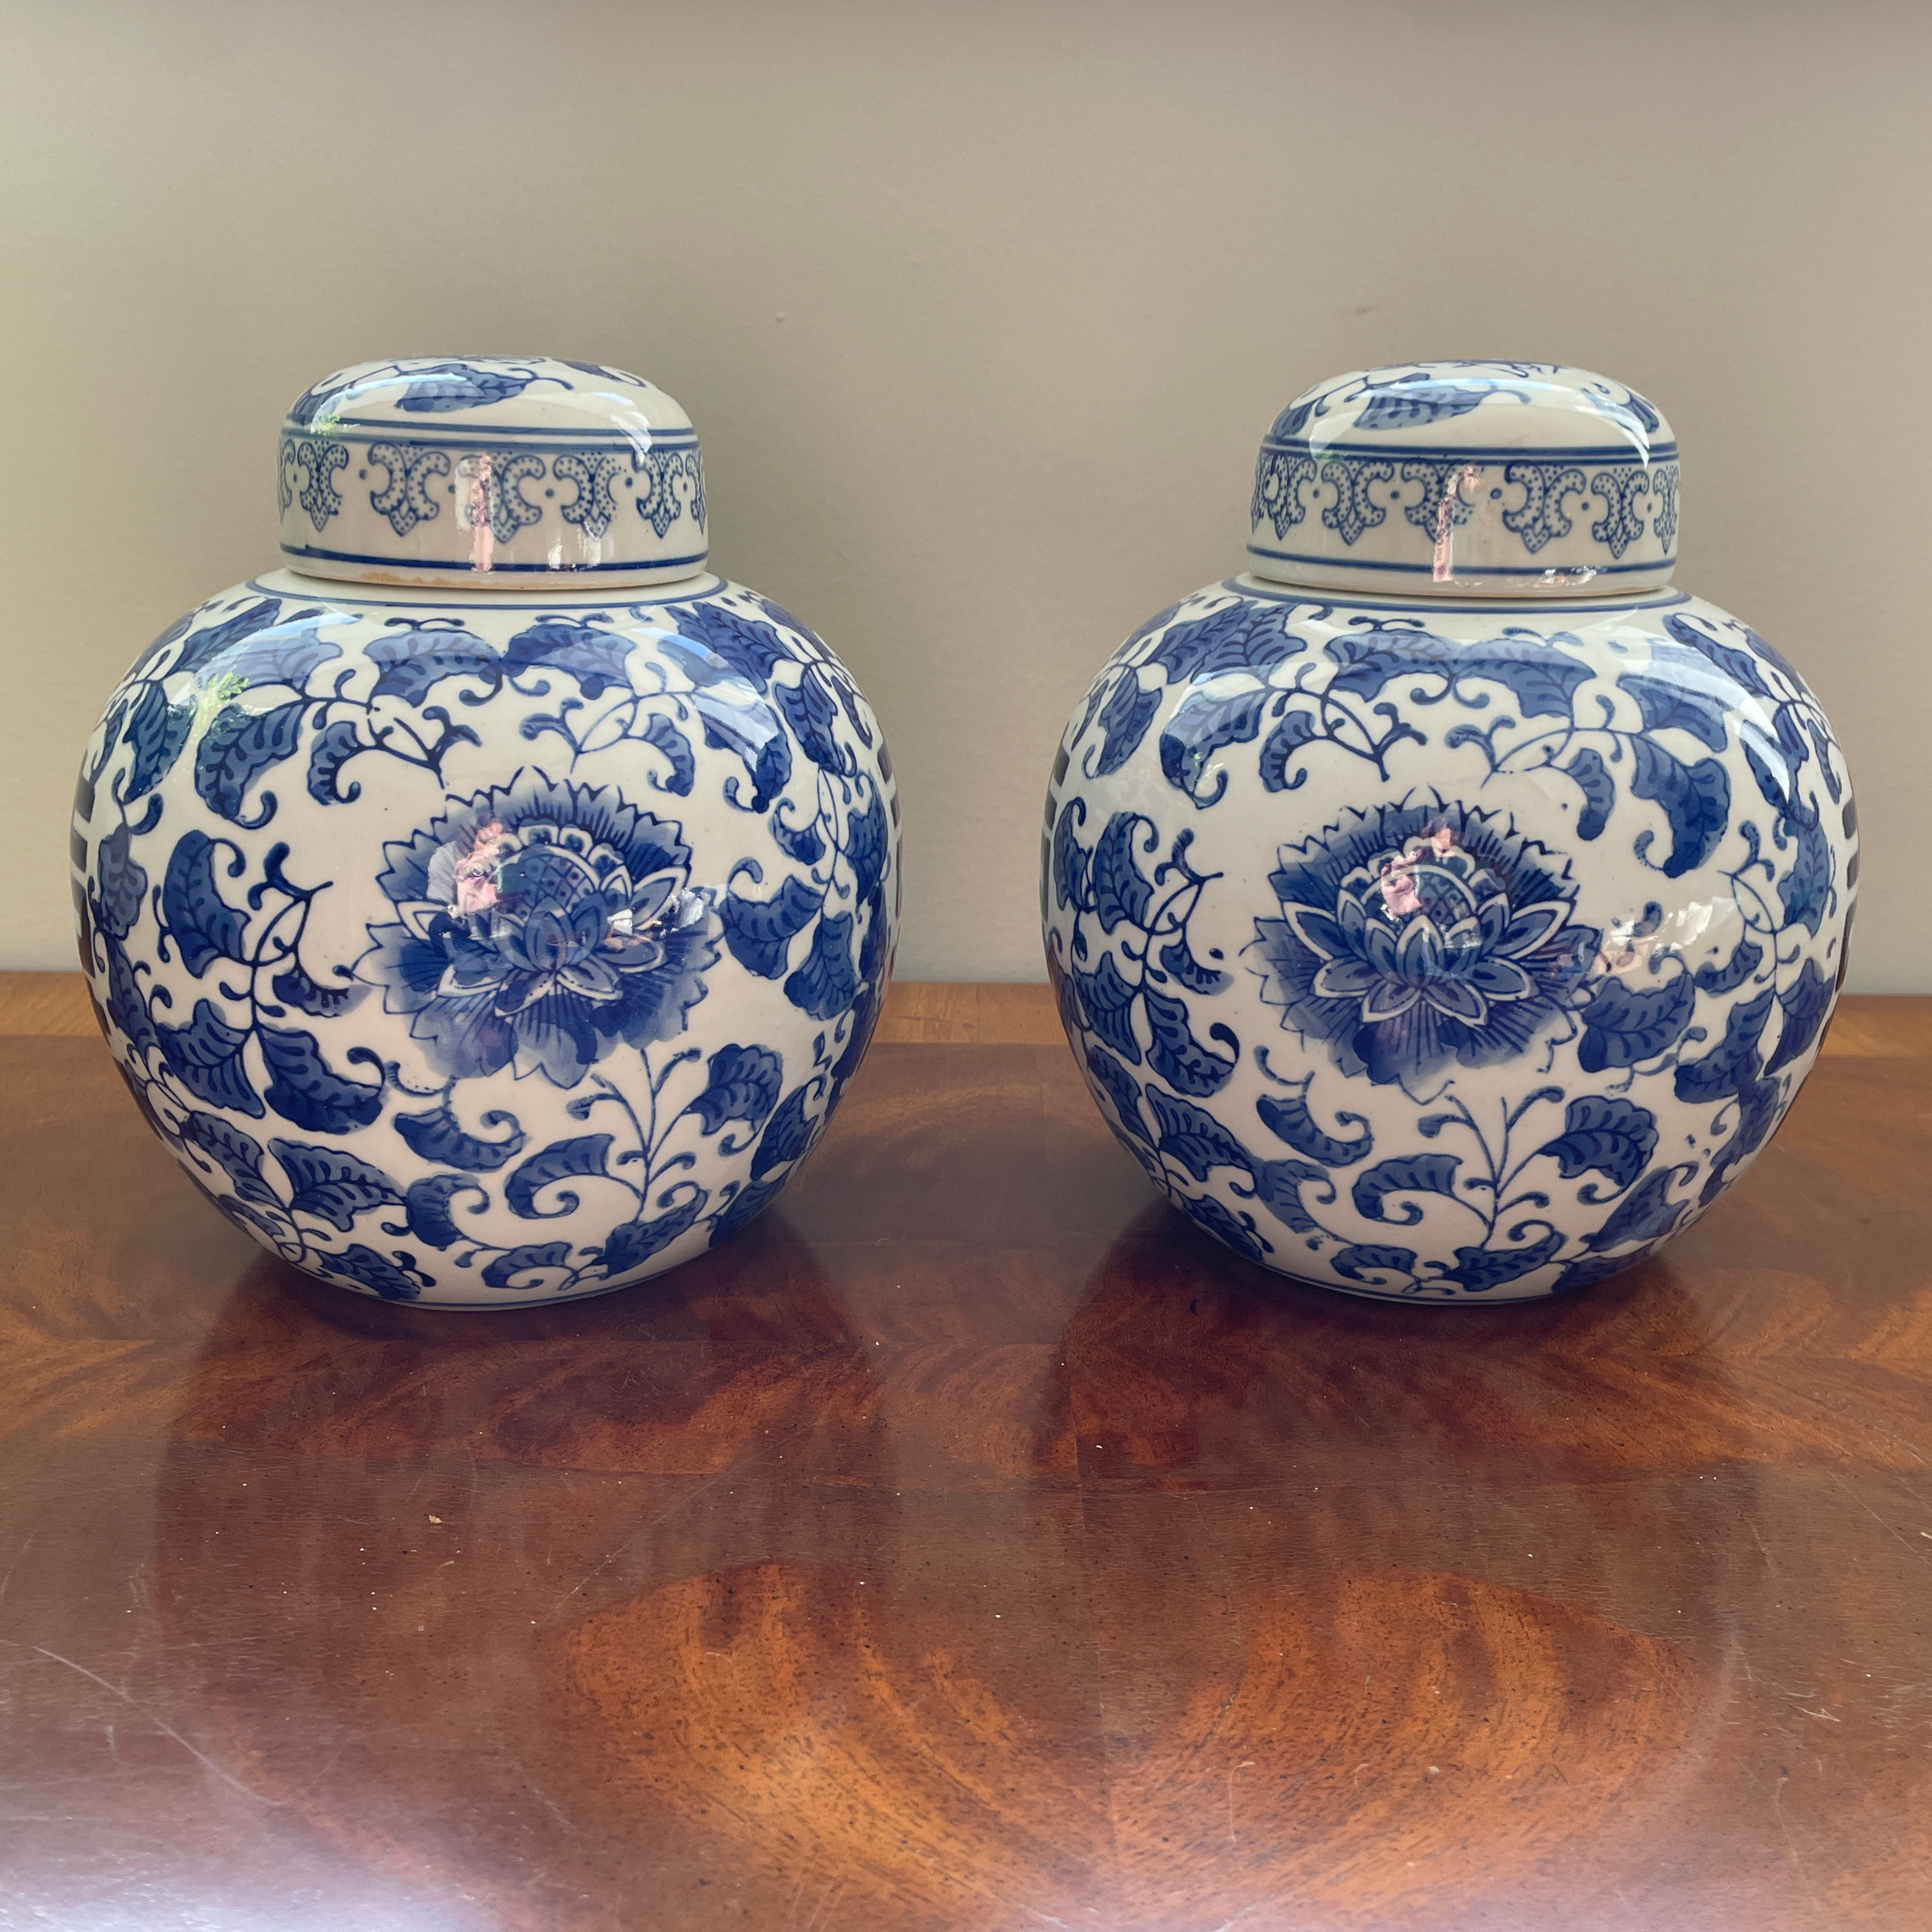 Pair of Double Happiness Jars